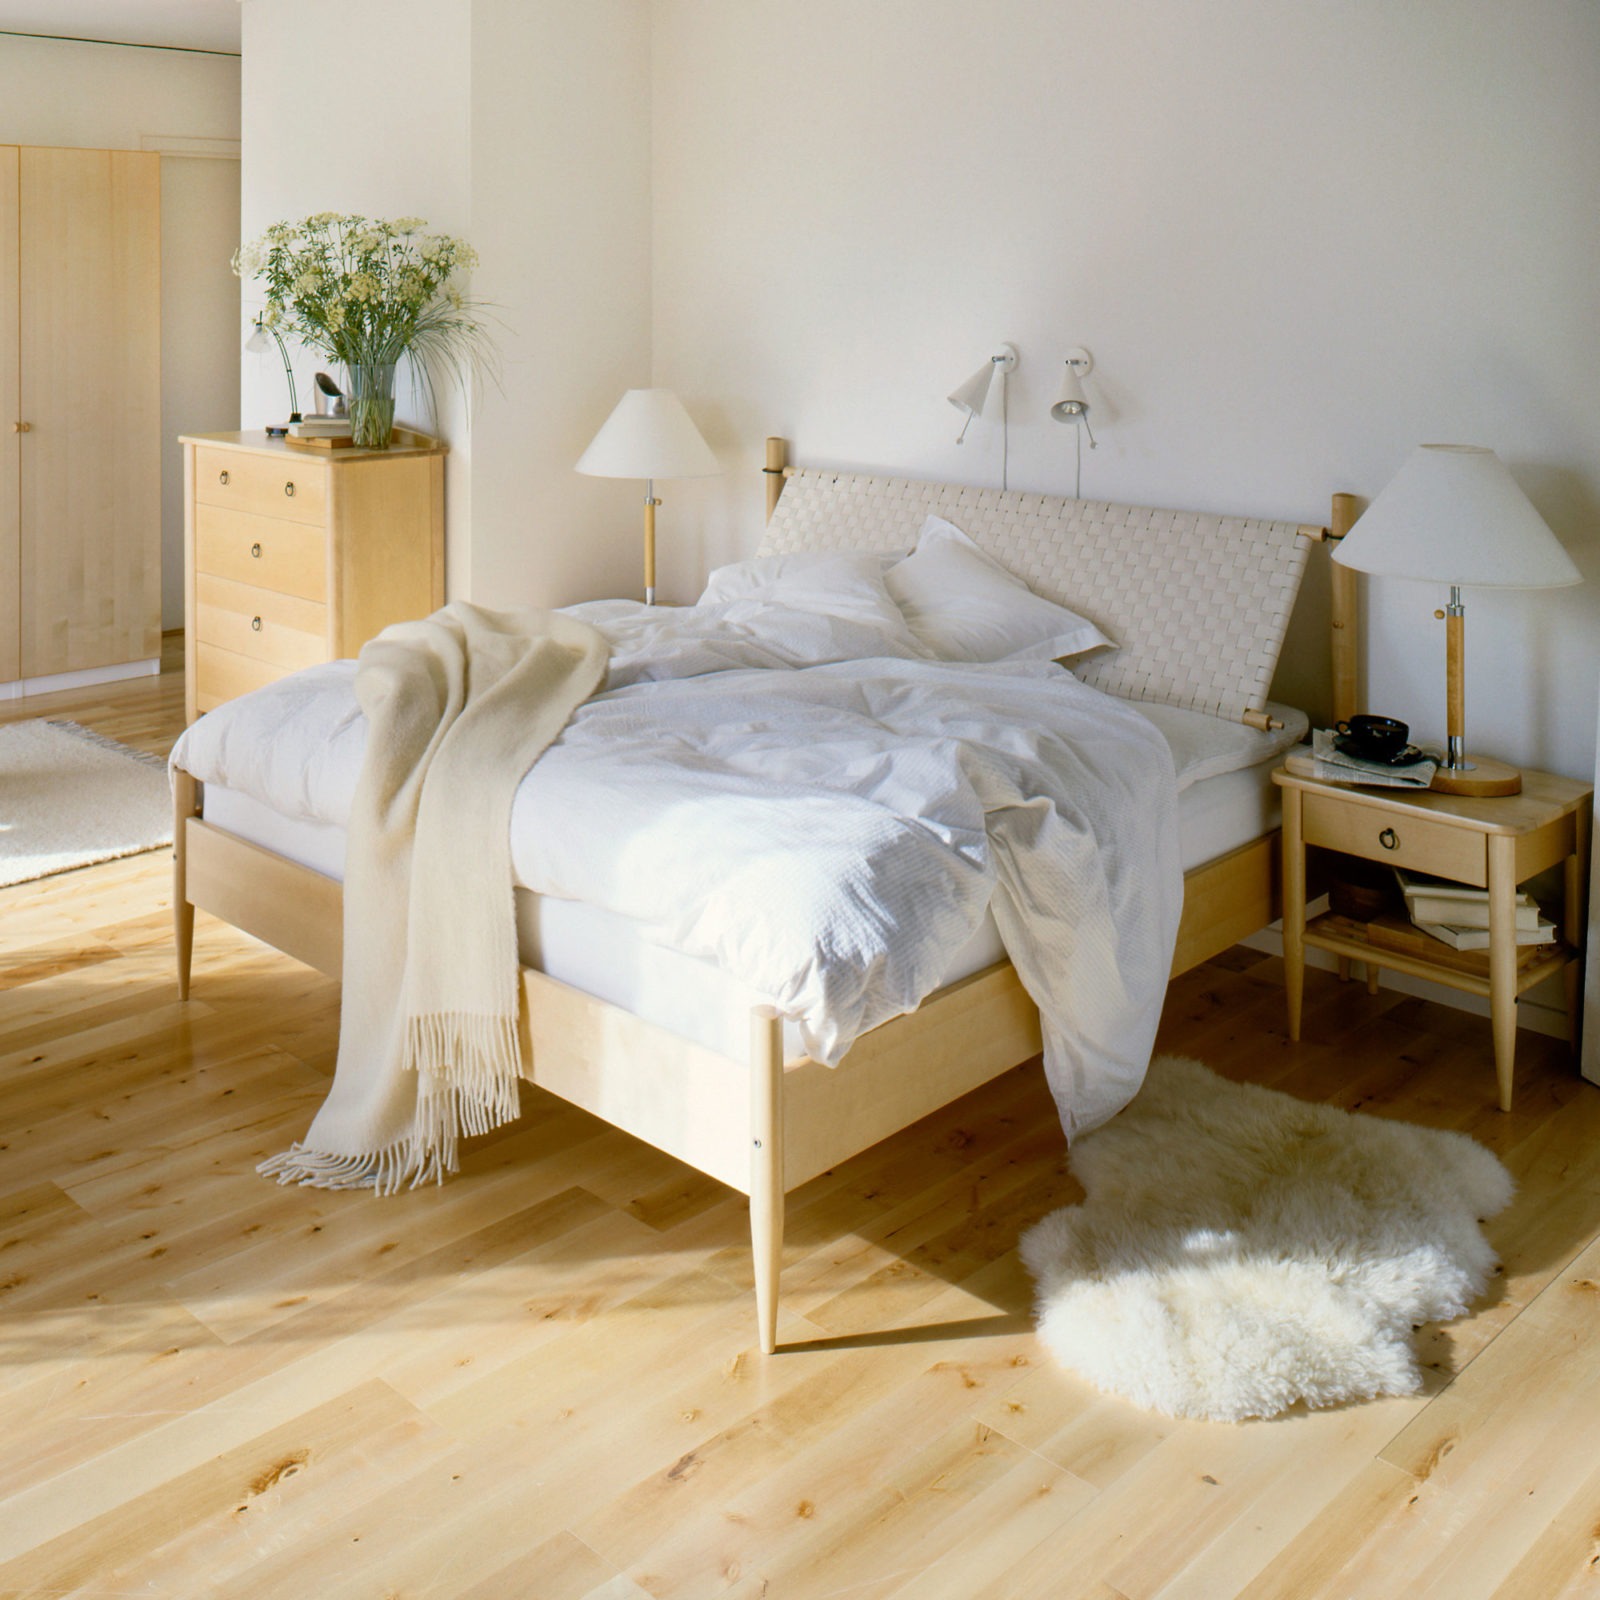 Scandinavian style bedroom with white bedlinen and furniture in light birch and soft, simple shapes.